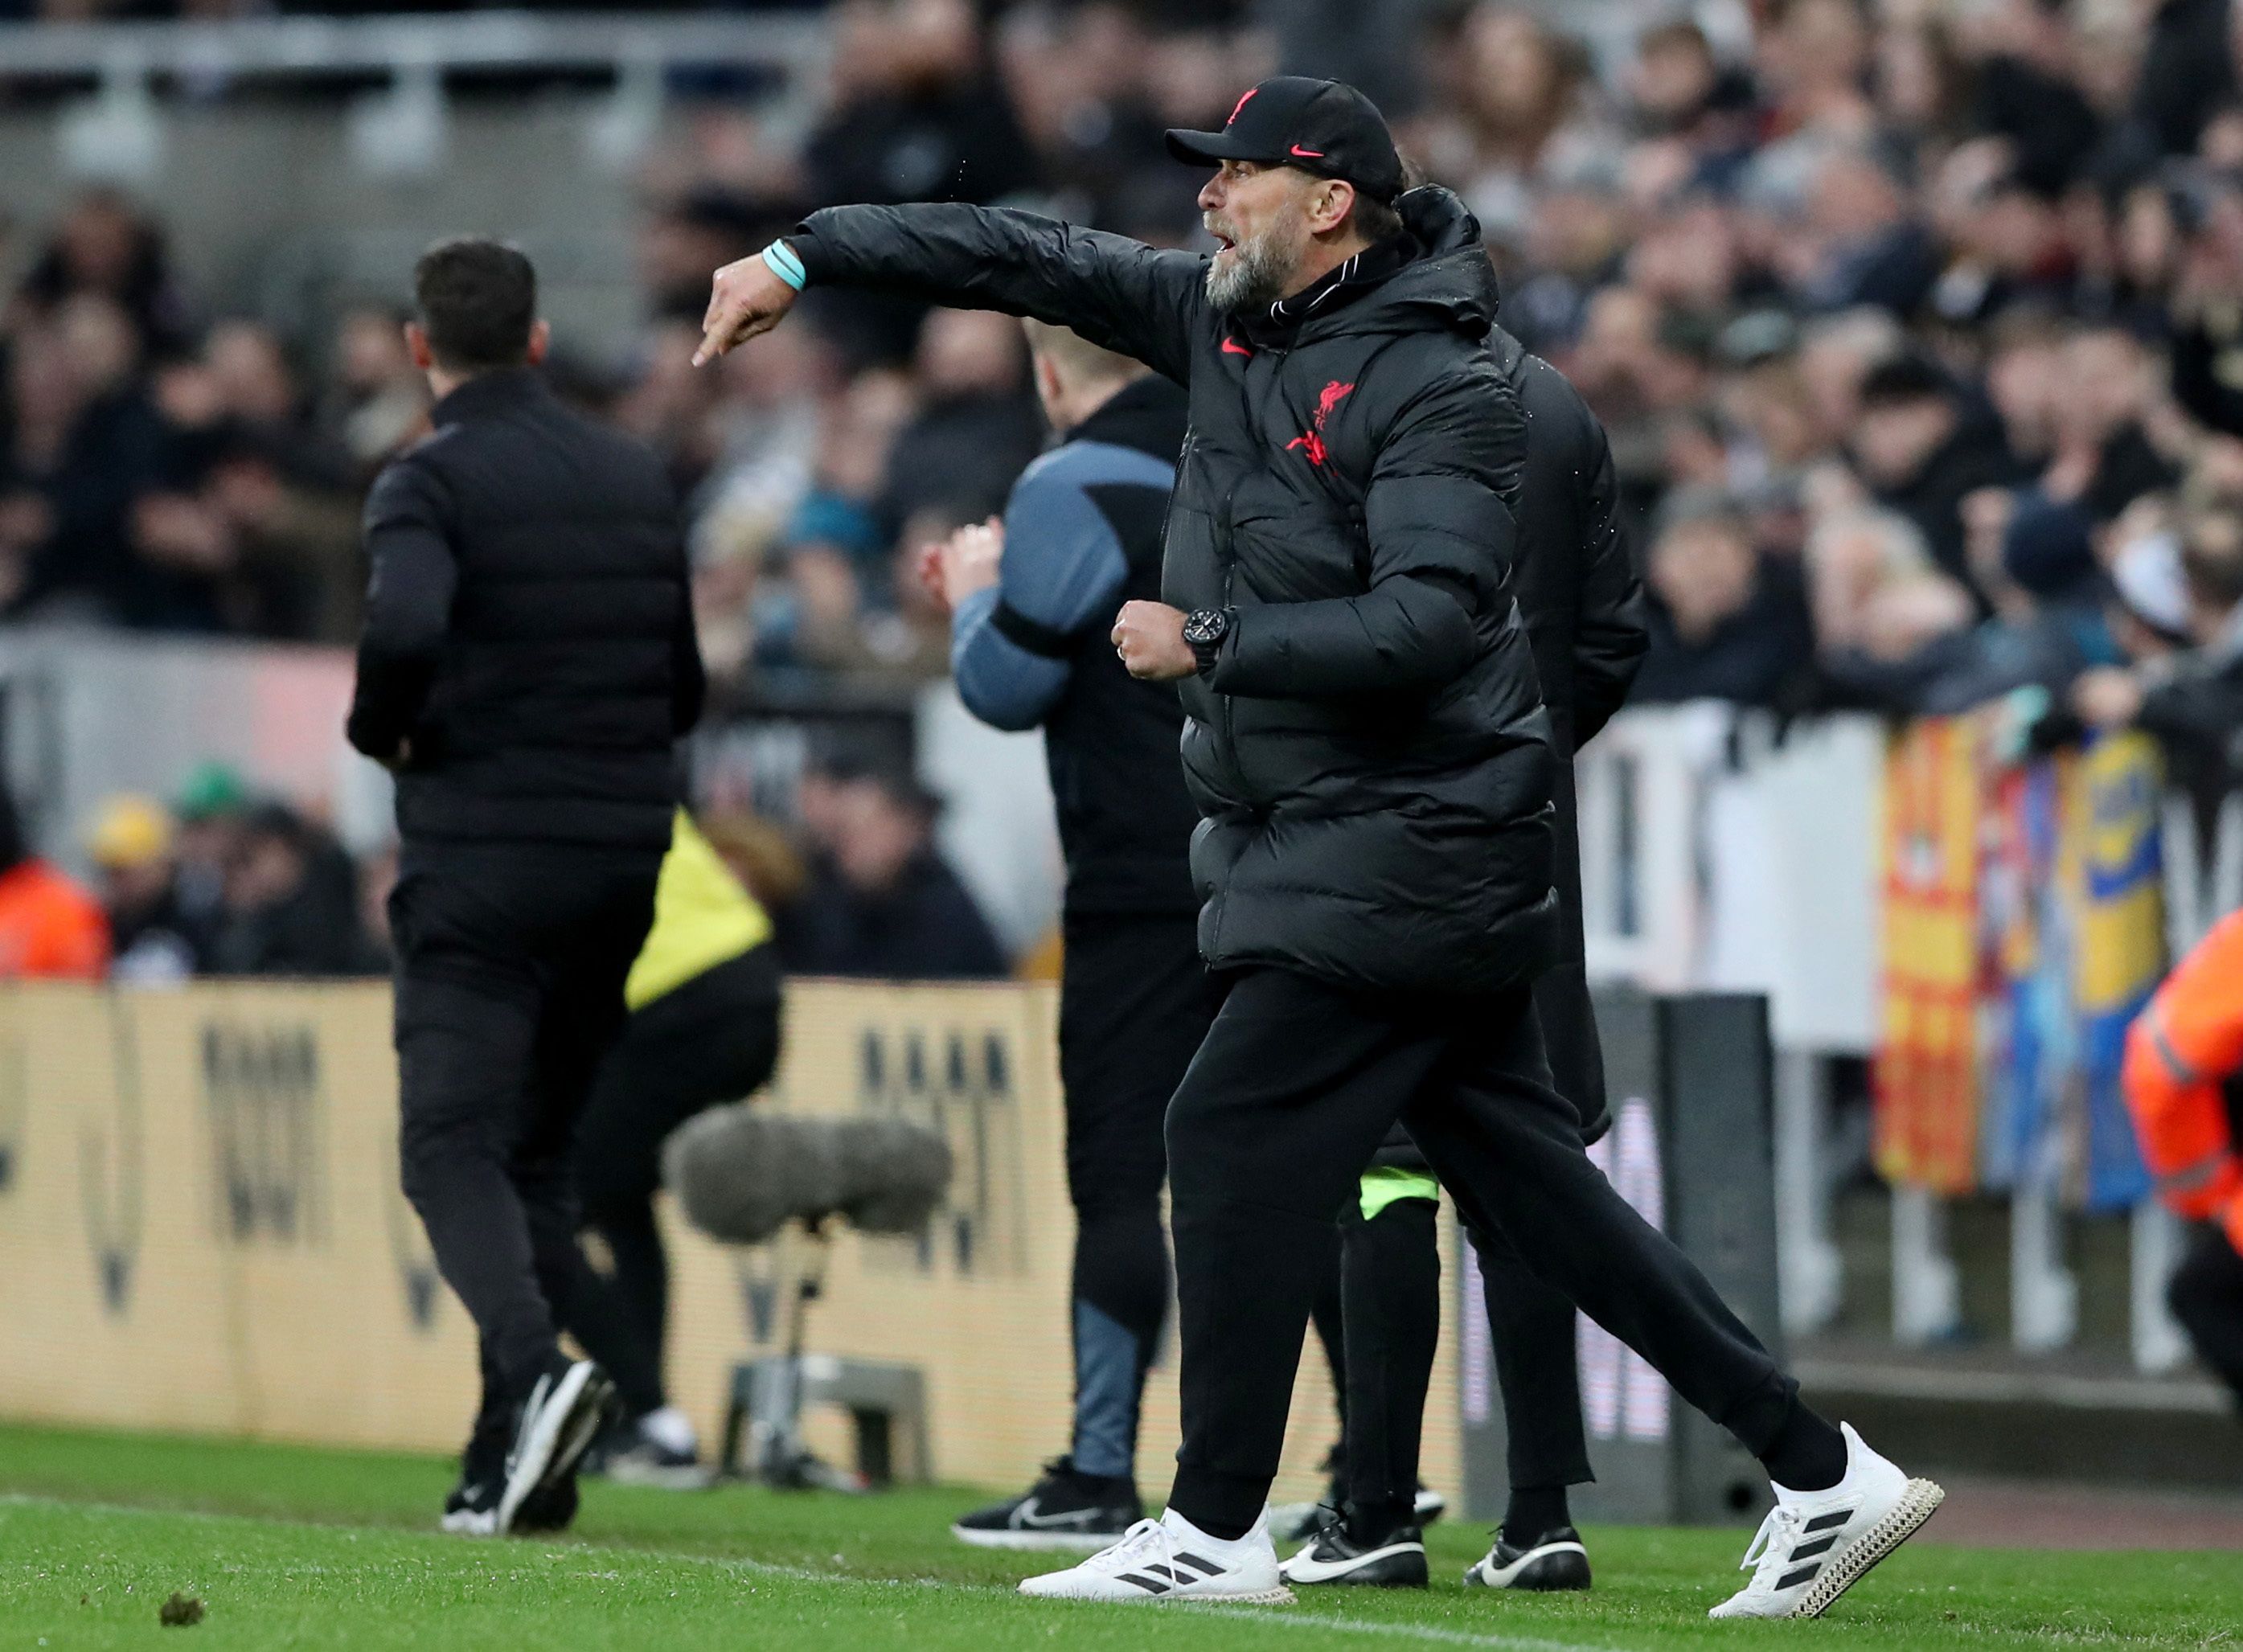 Liverpool manager Jurgen Klopp animated on touchline during Newcastle game